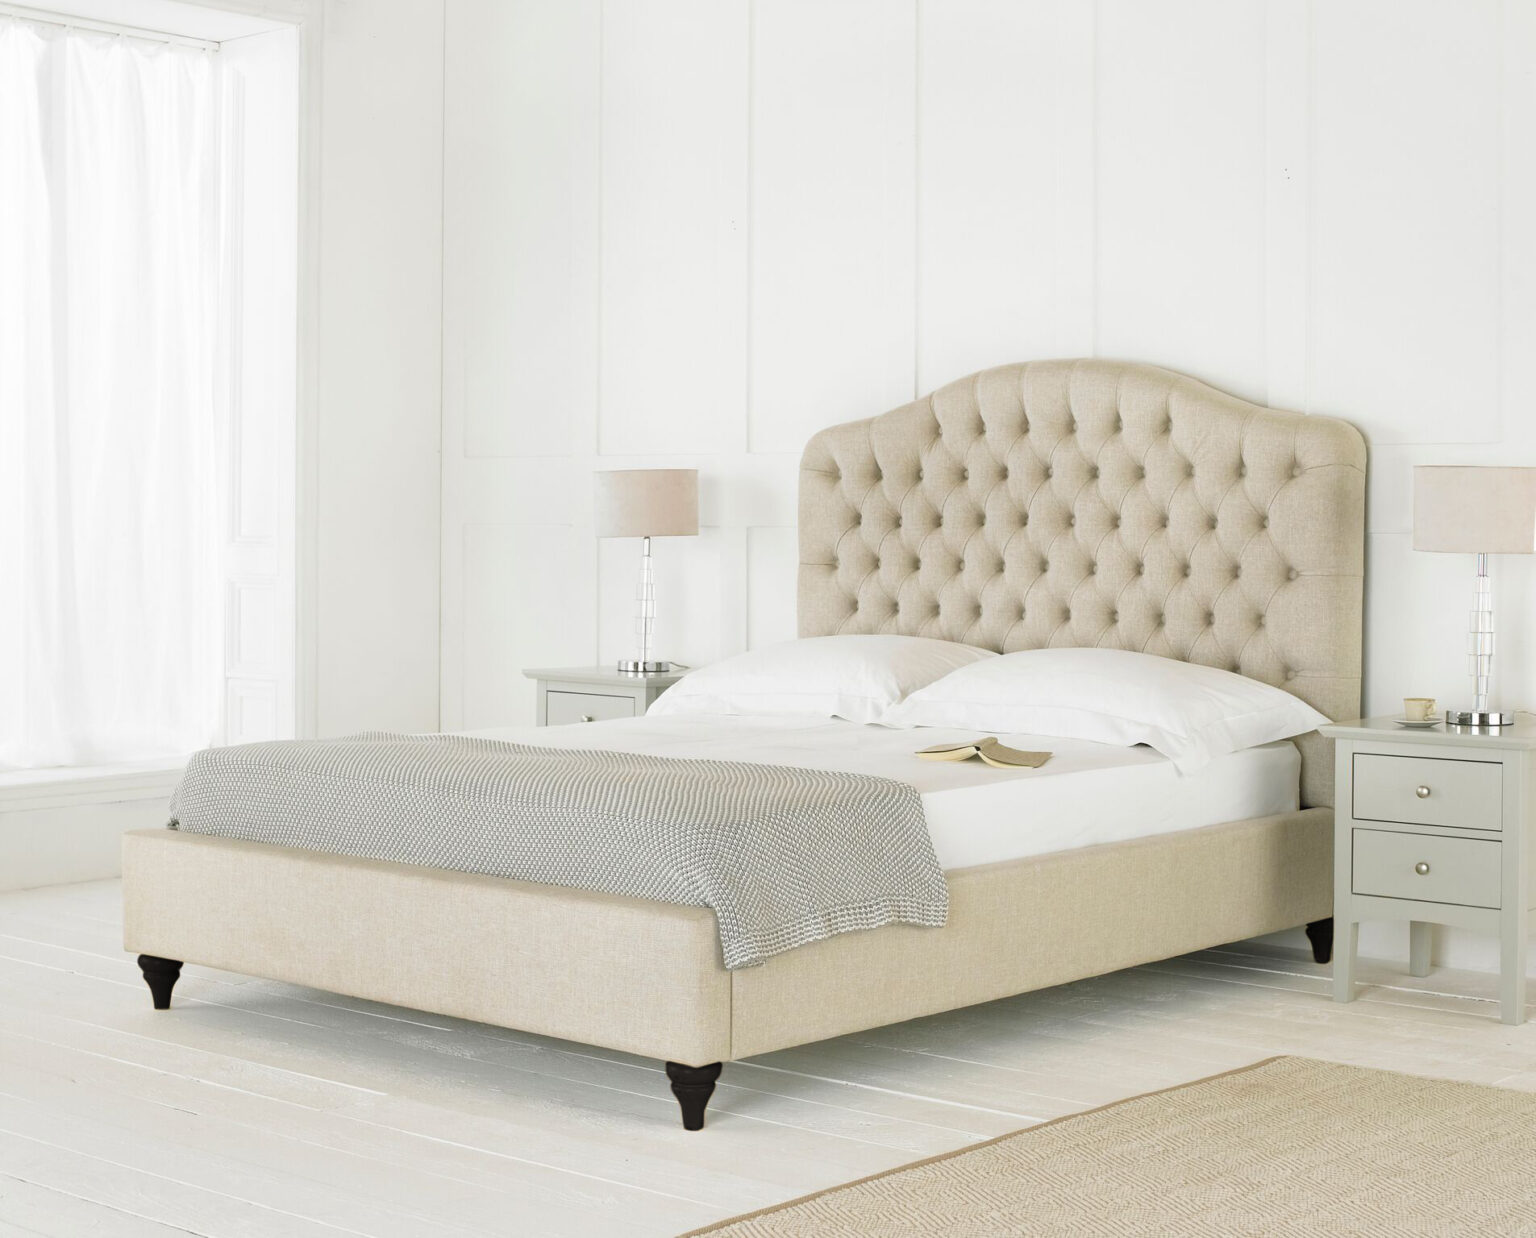 Lacey Chesterfield Upholstered Bed Frame Aaa Beds 